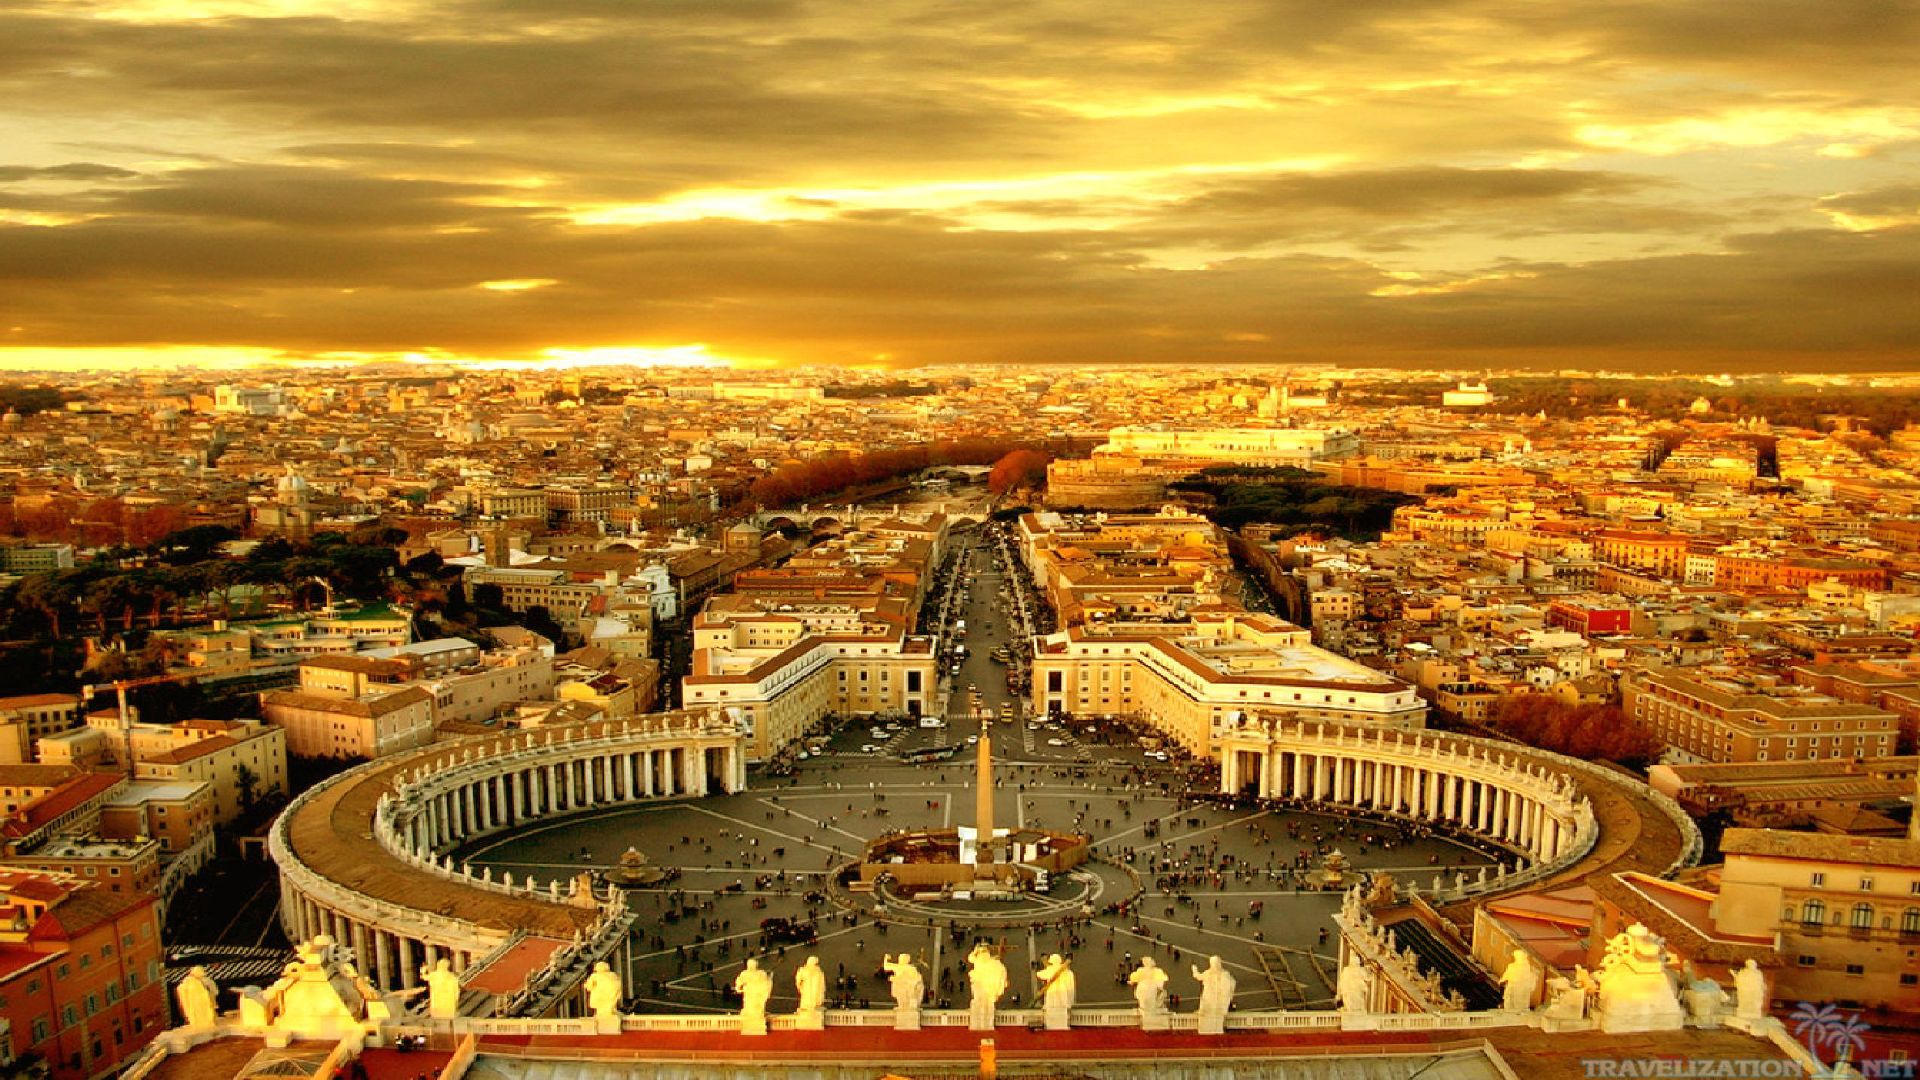 Great City Of Rome - HD Wallpaper 